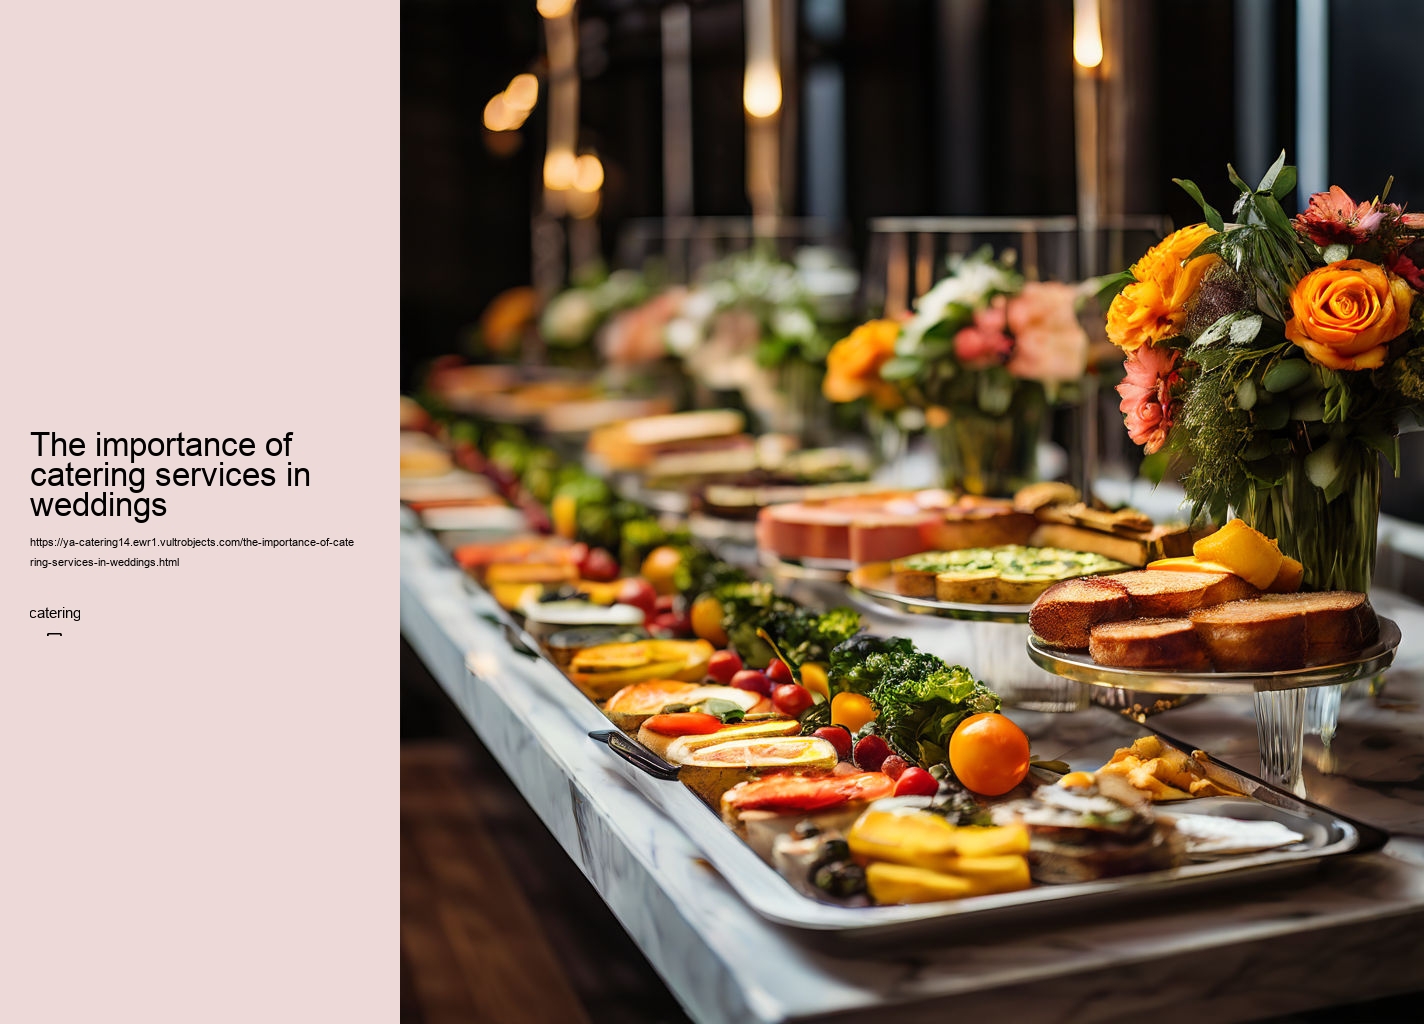 The importance of catering services in weddings